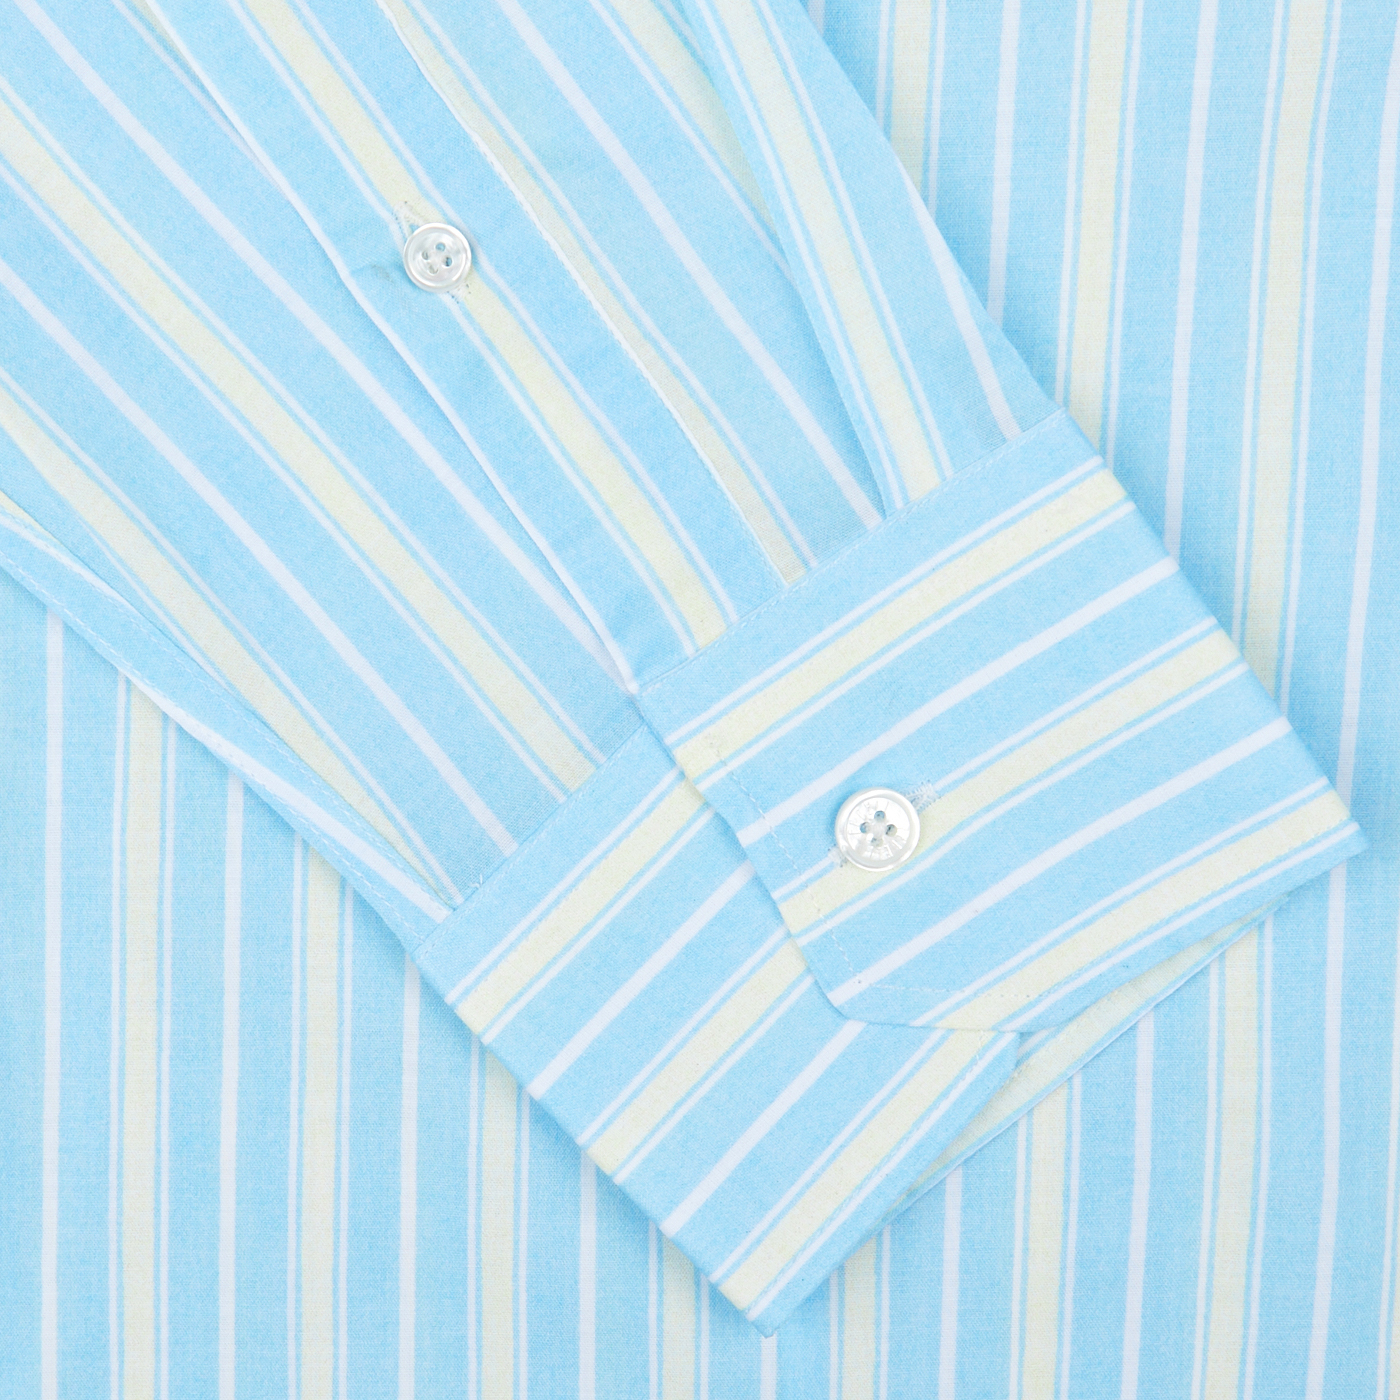 A close-up view of a Fedeli Sky Blue Yellow Striped Cotton Beach Shirt with a focus on the cuff and buttons.